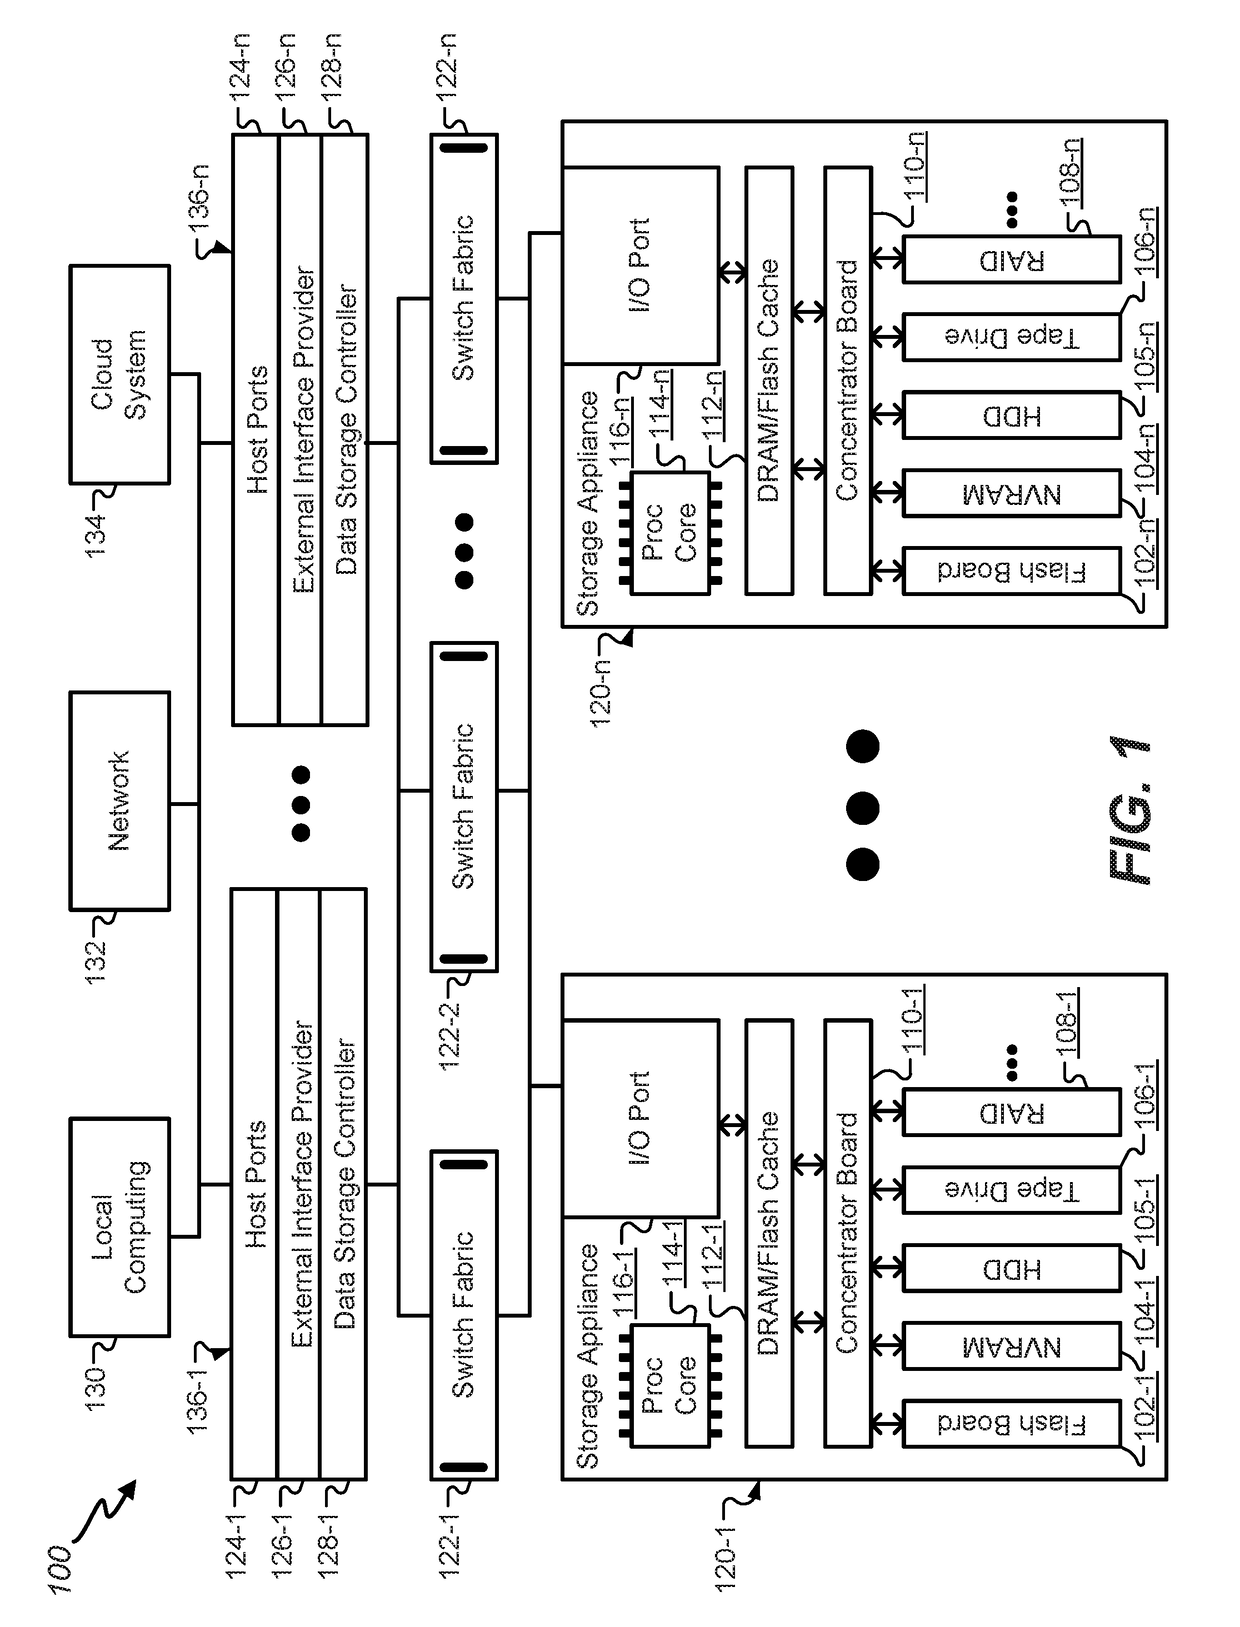 Low-latency direct cloud access with file system hierarchies and semantics